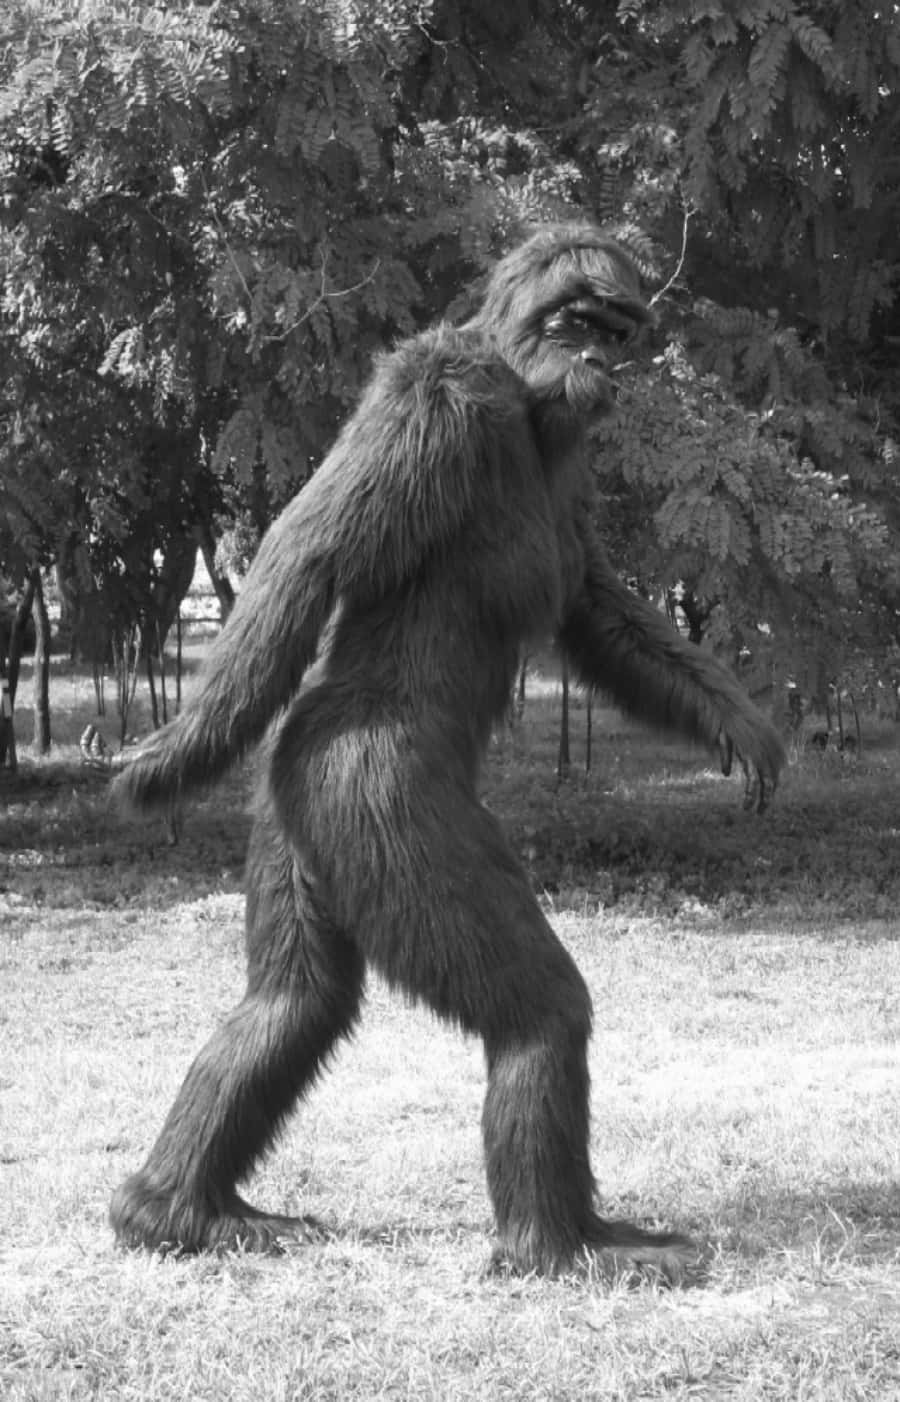 A Bigfoot sighting in the deep forests of North America.